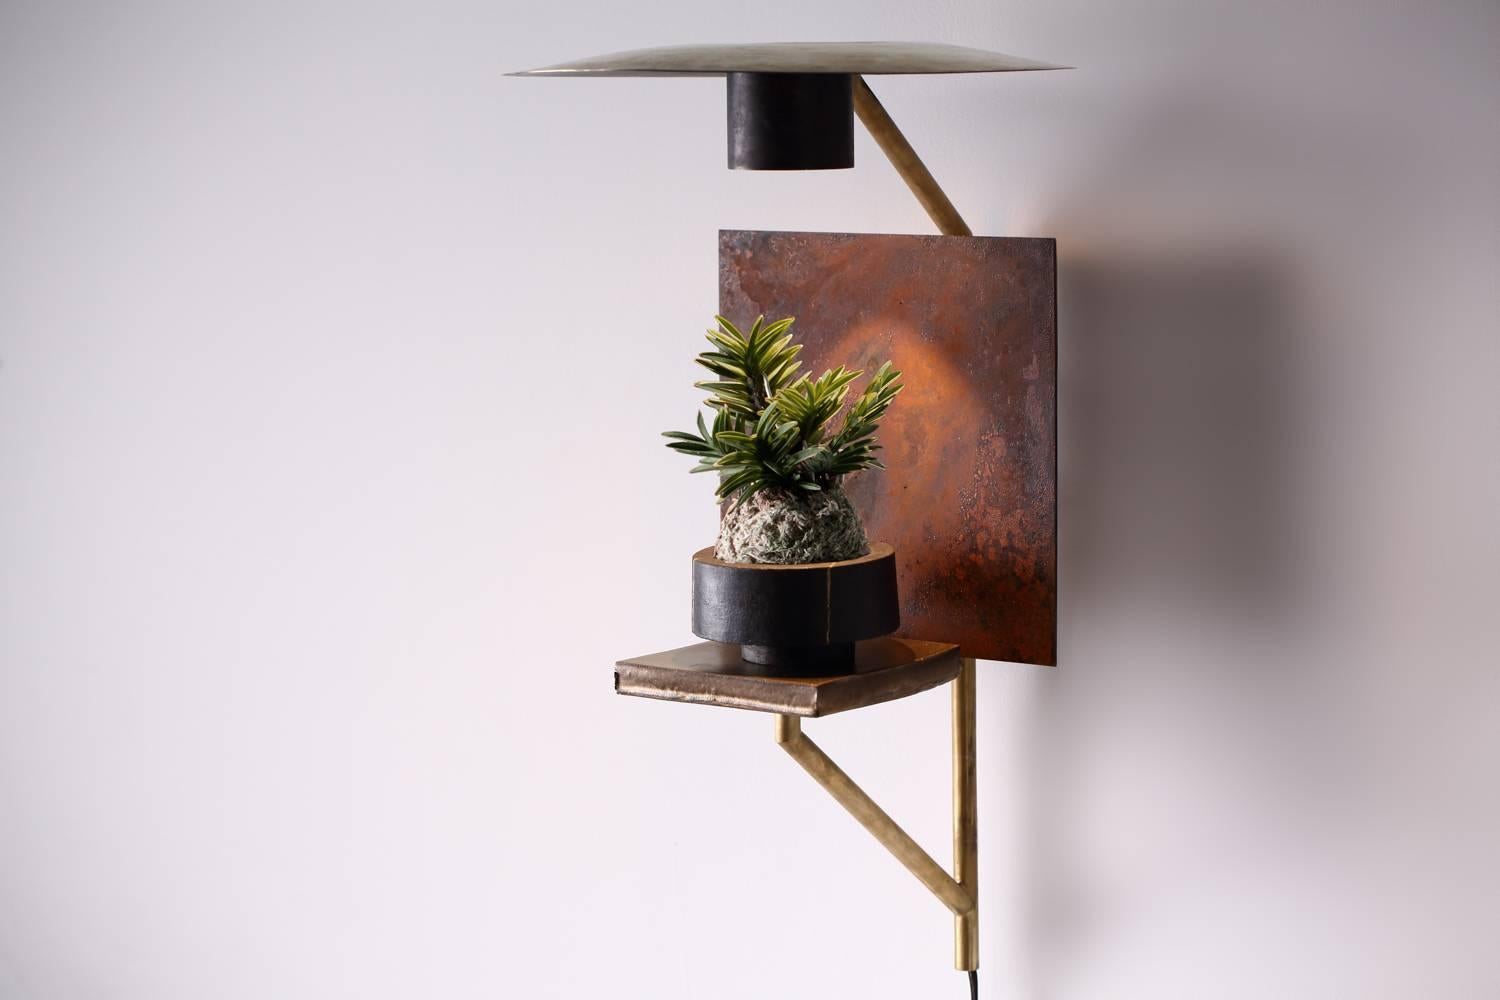 The Mantis - brass LED light plant grower - Luvere Studio
Materials: Brass, LED lighting. Interchangeable backplate and base plate
Dimensions: 29” x 16” x 16”

The Mantis is a wall-mounted, full-spectrum LED light fixture designed to display and